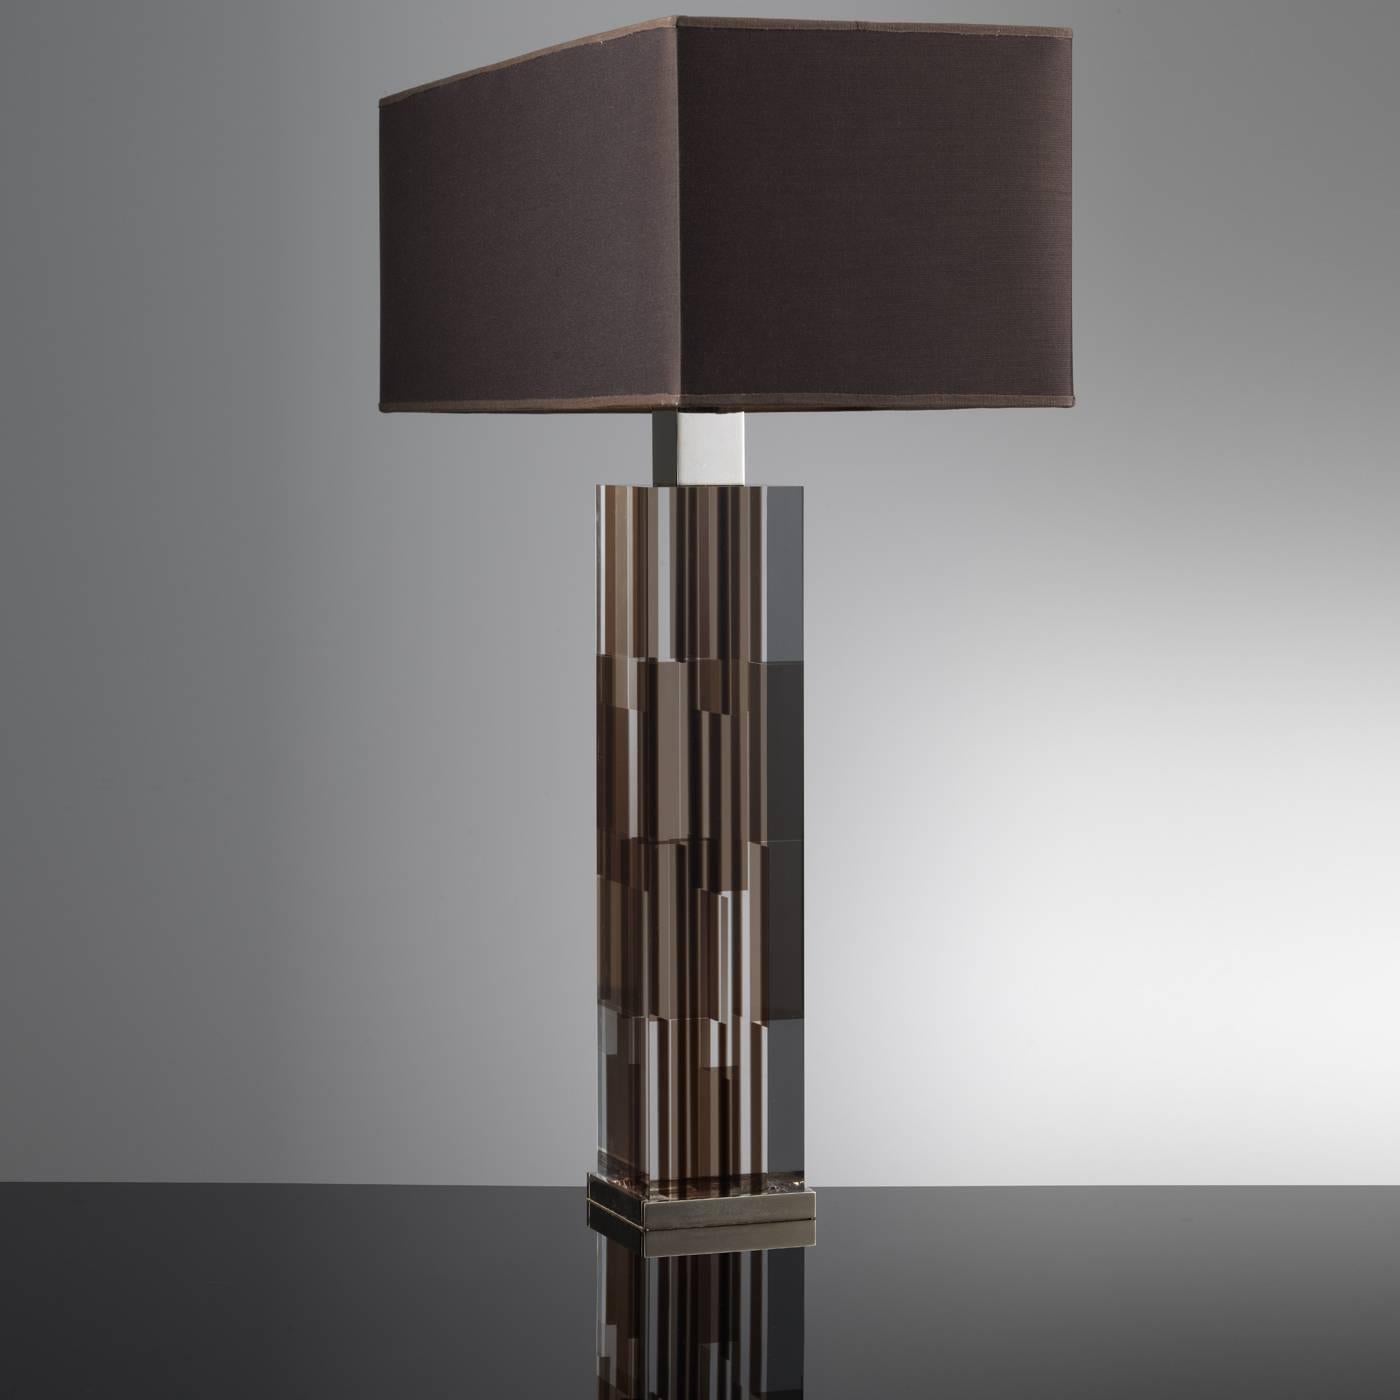 The body of this exquisite lamp is made of a complex structure of squared and rectangular Lucite pieces in brown and transparent finishes. The effect is a single block that changes color and design depending on the point of view. The top and bottom